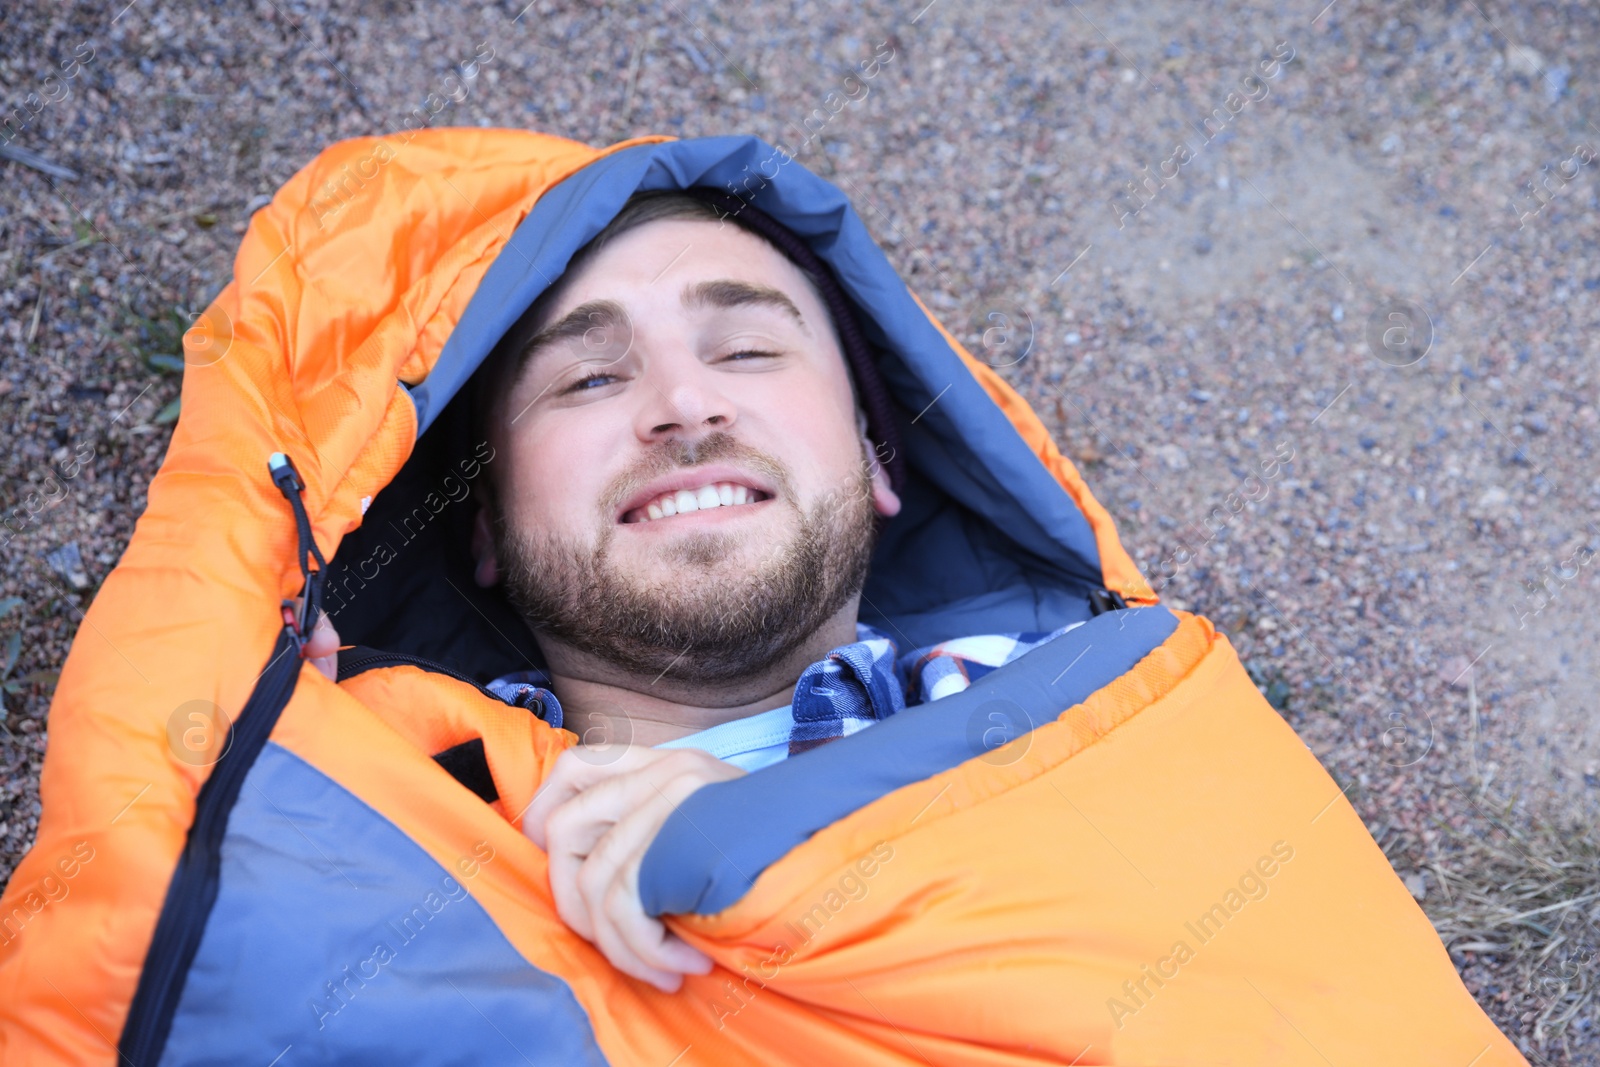 Photo of Male camper lying in sleeping bag on ground, view from above